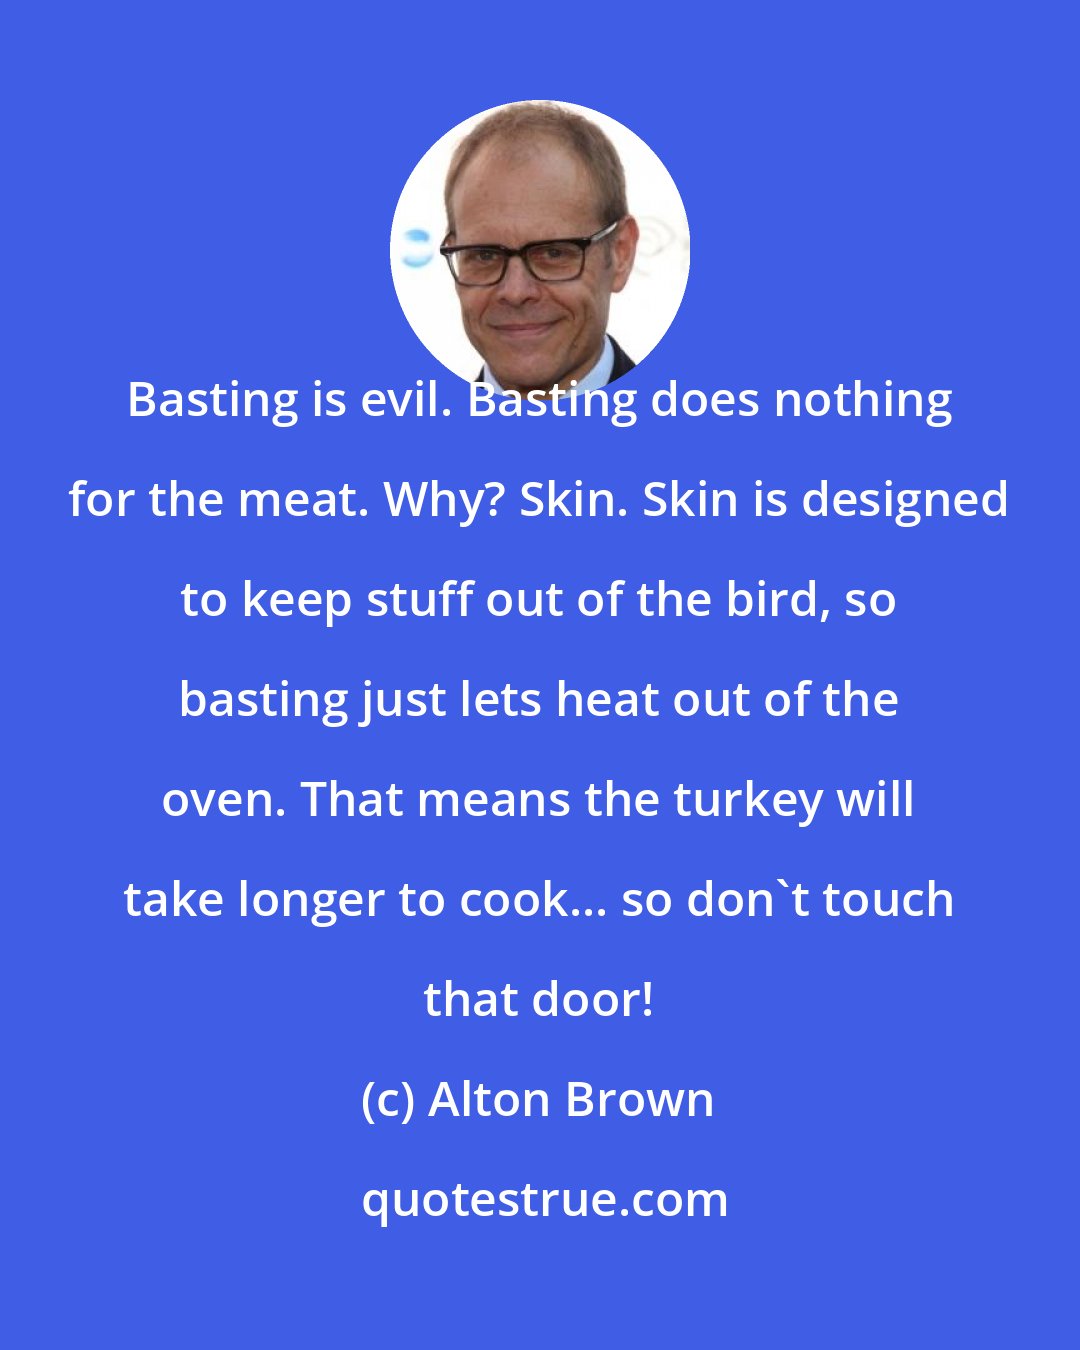 Alton Brown: Basting is evil. Basting does nothing for the meat. Why? Skin. Skin is designed to keep stuff out of the bird, so basting just lets heat out of the oven. That means the turkey will take longer to cook... so don't touch that door!